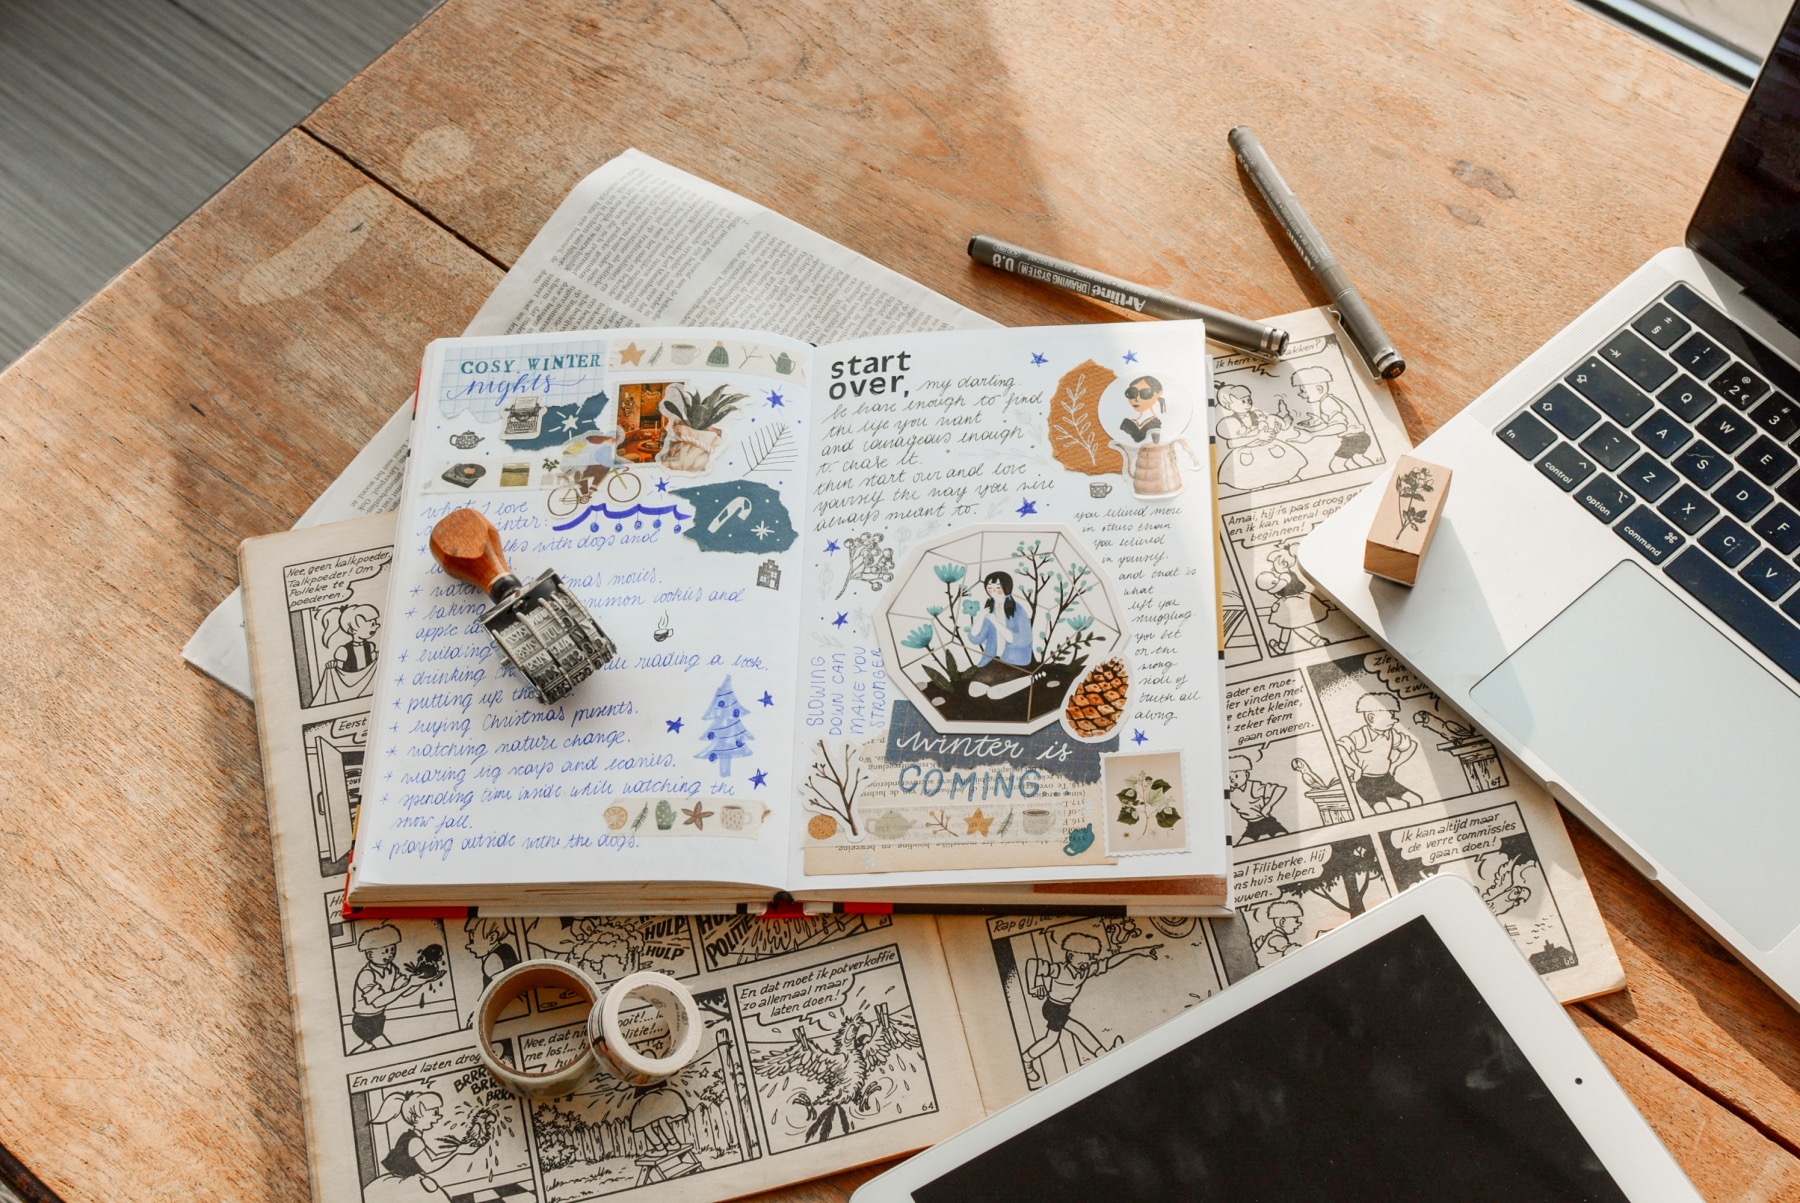 add washi tape and stickers to make a cool collage journal